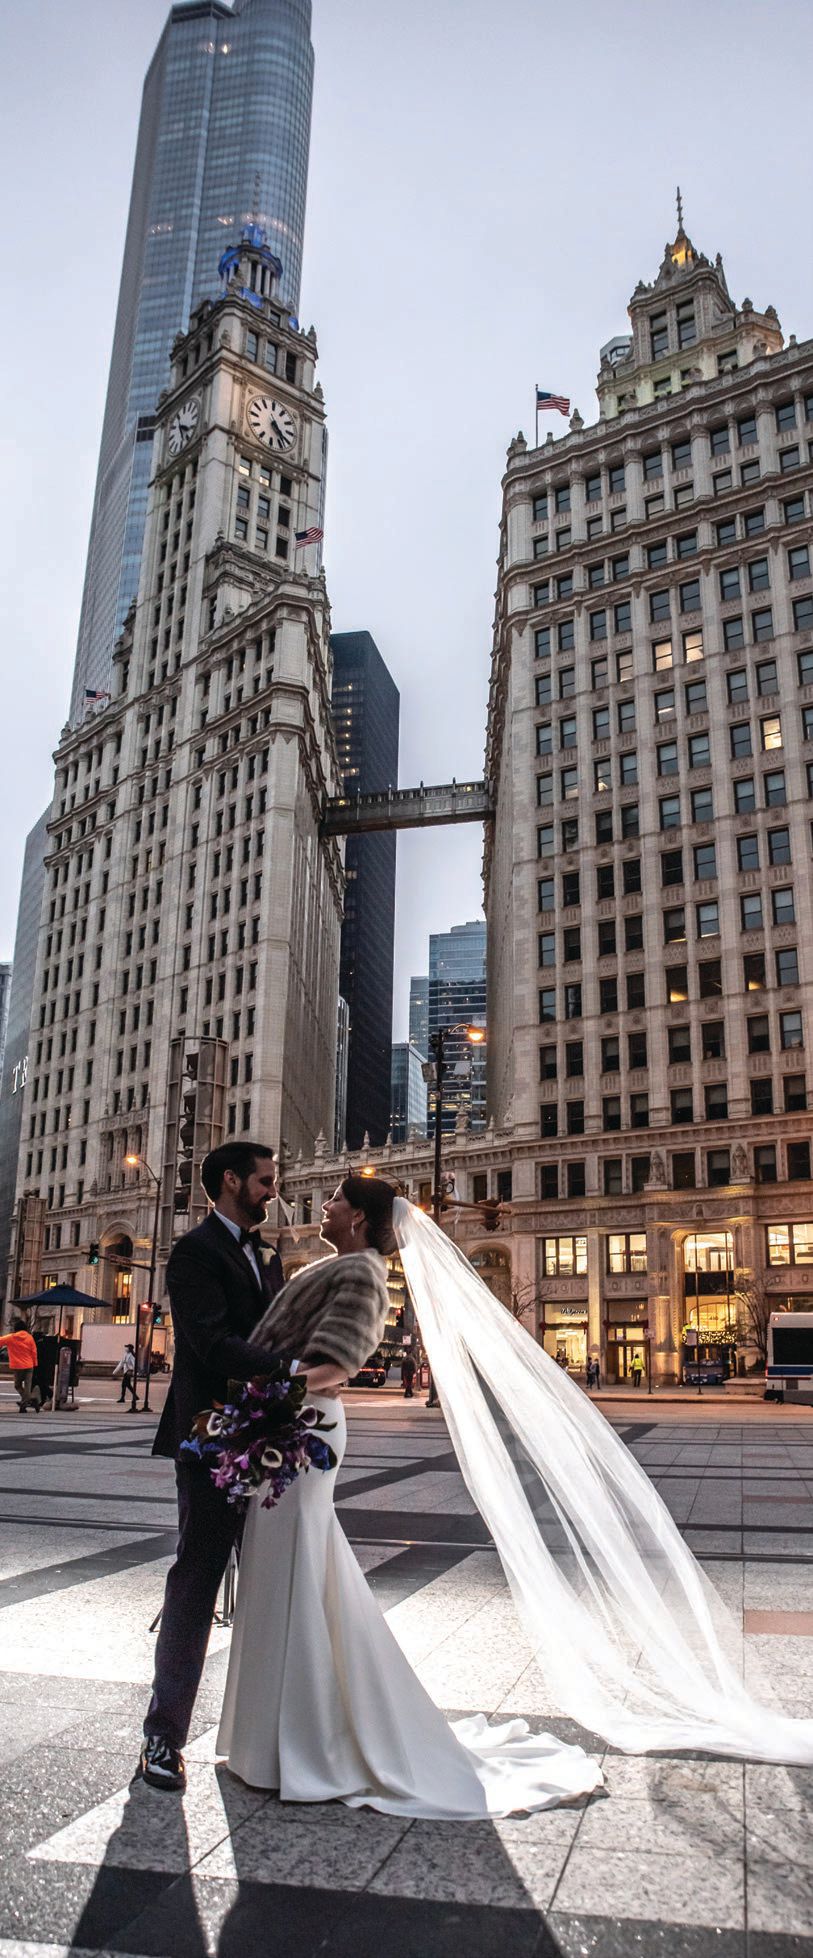 An iconic Chicago wedding portrait at The Wrigley Building www.lacourimages.com Photo Credit: LaCour Images Planner: Frank Event Design